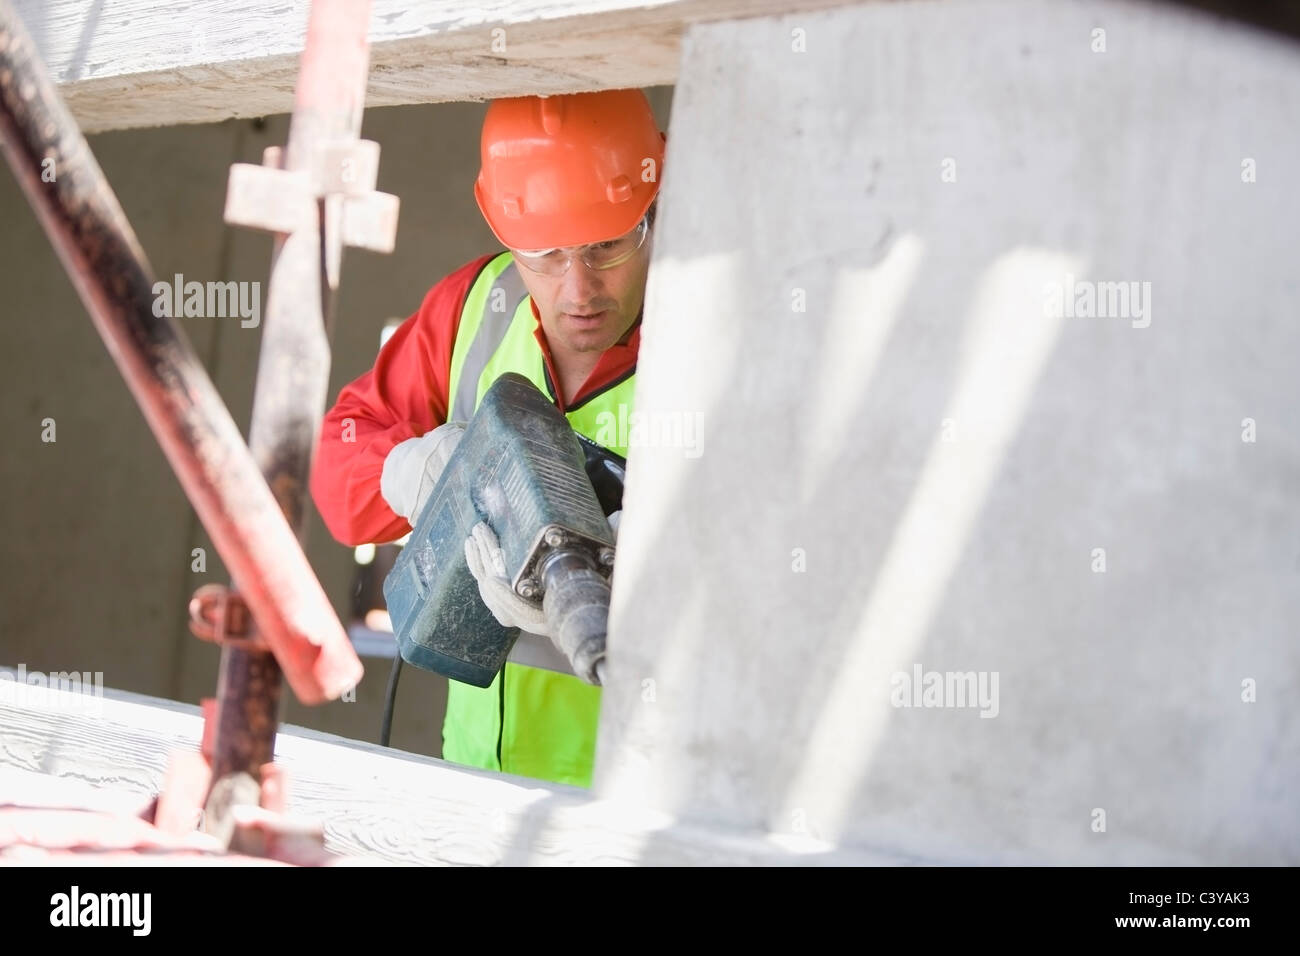 Building worker handling a drill Stock Photo